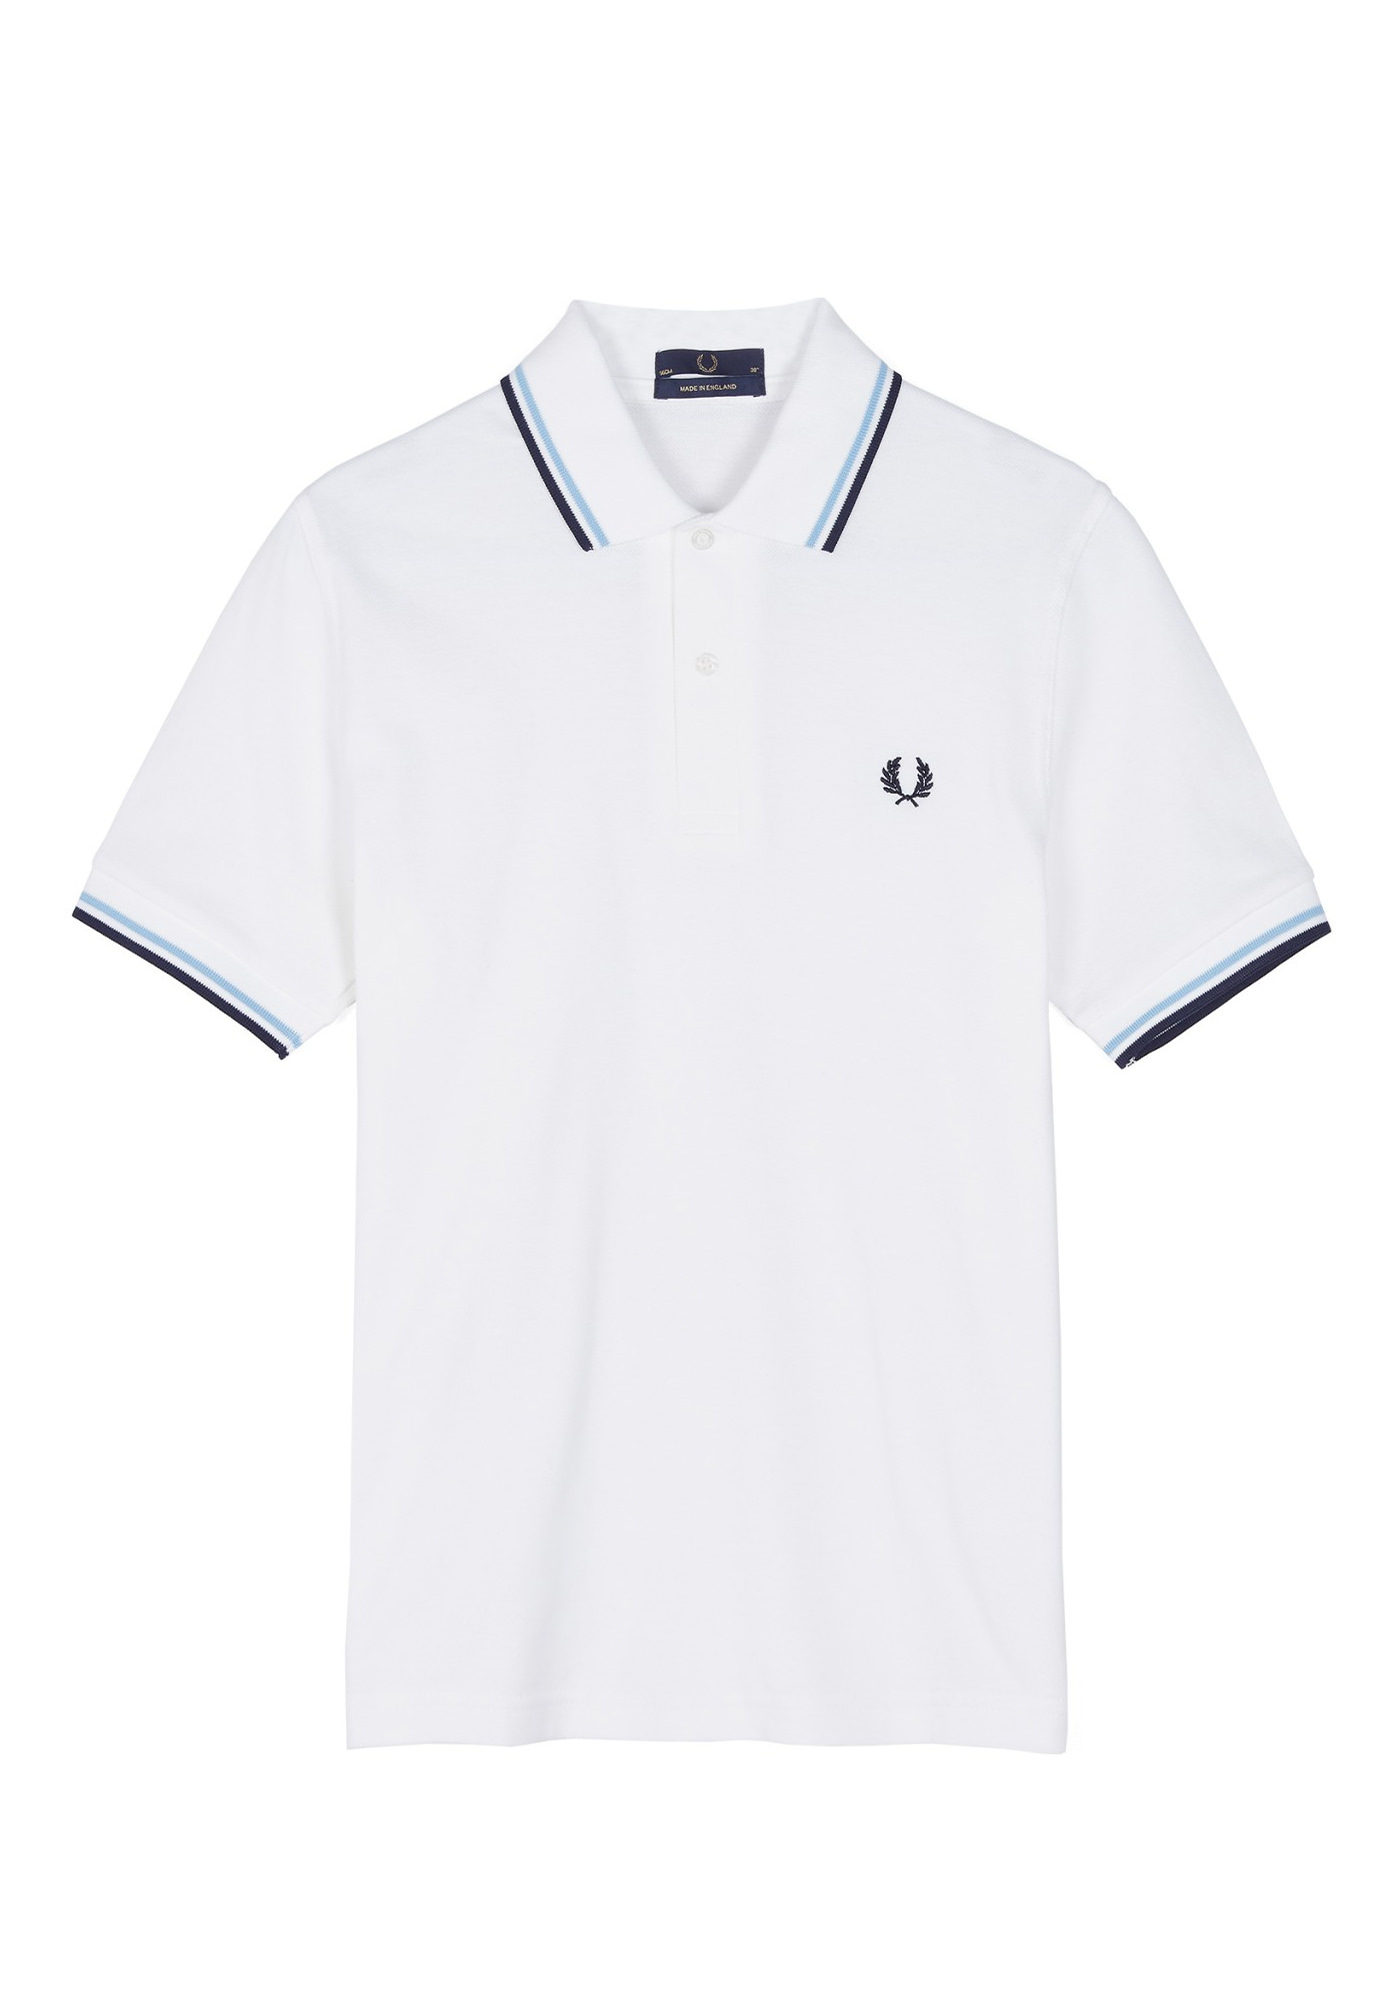 FRED PERRY SHIRT - M12 (Made in England) 出典：FRED PERRY　http://www.fredperry.jp/item/M12N.html?colour=120